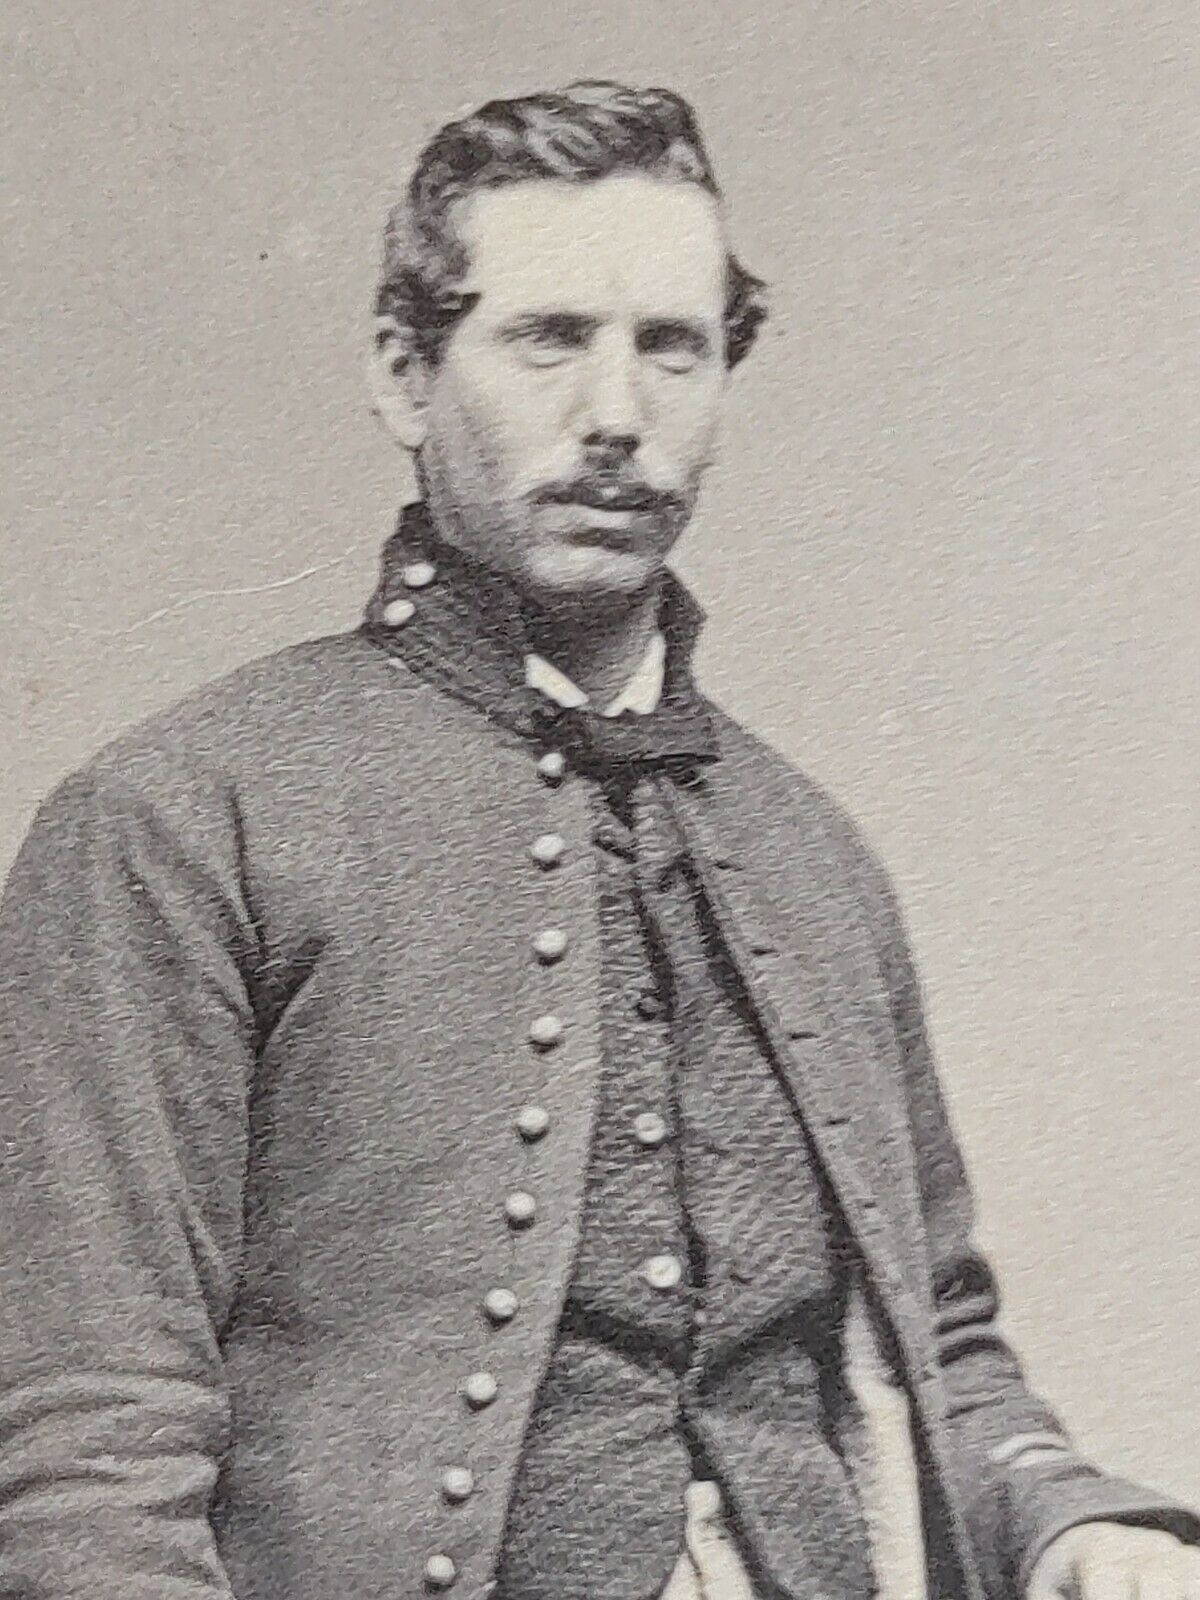 Civil War Original Cdv Photo Of Union Soldier /officer. By Rome, Ny Photographer